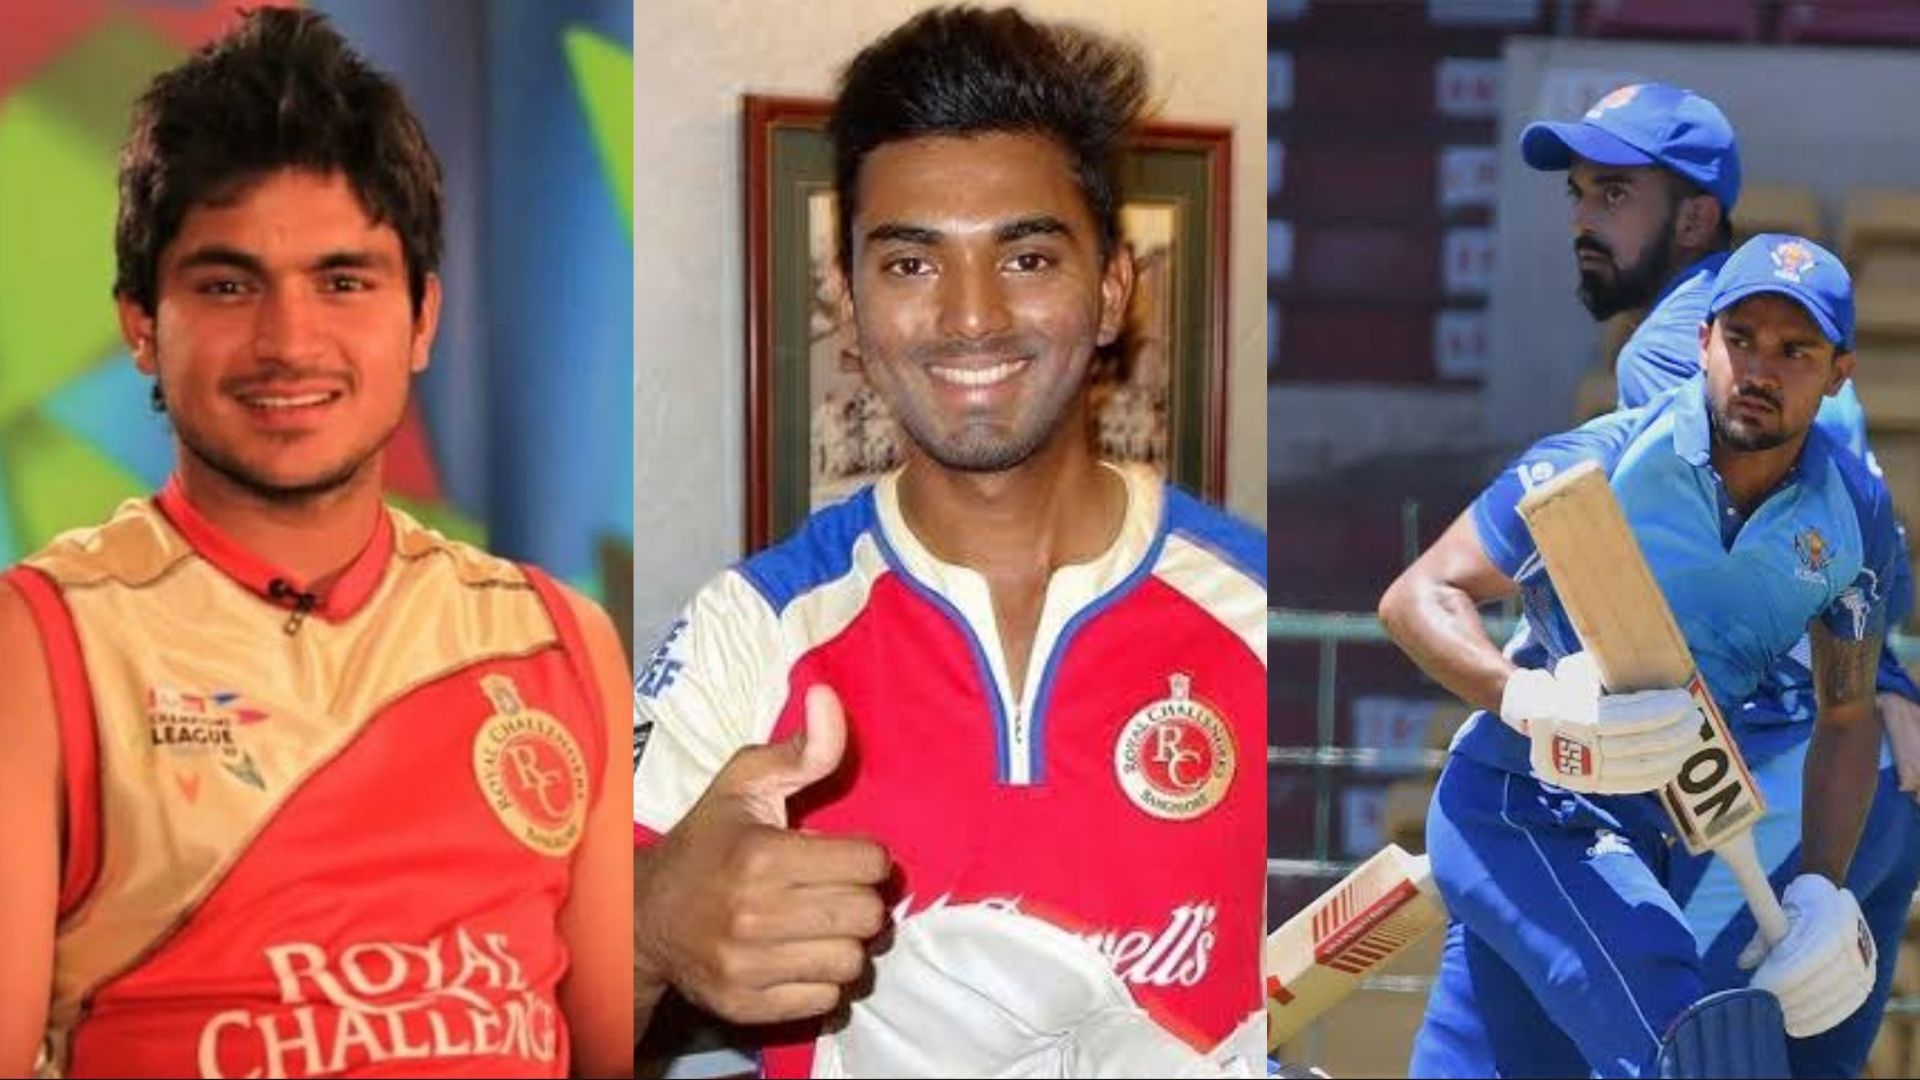 Former Royal Challengers Bangalore stars Manish Pandey and KL Rahul will play together for the Lucknow Super Giants